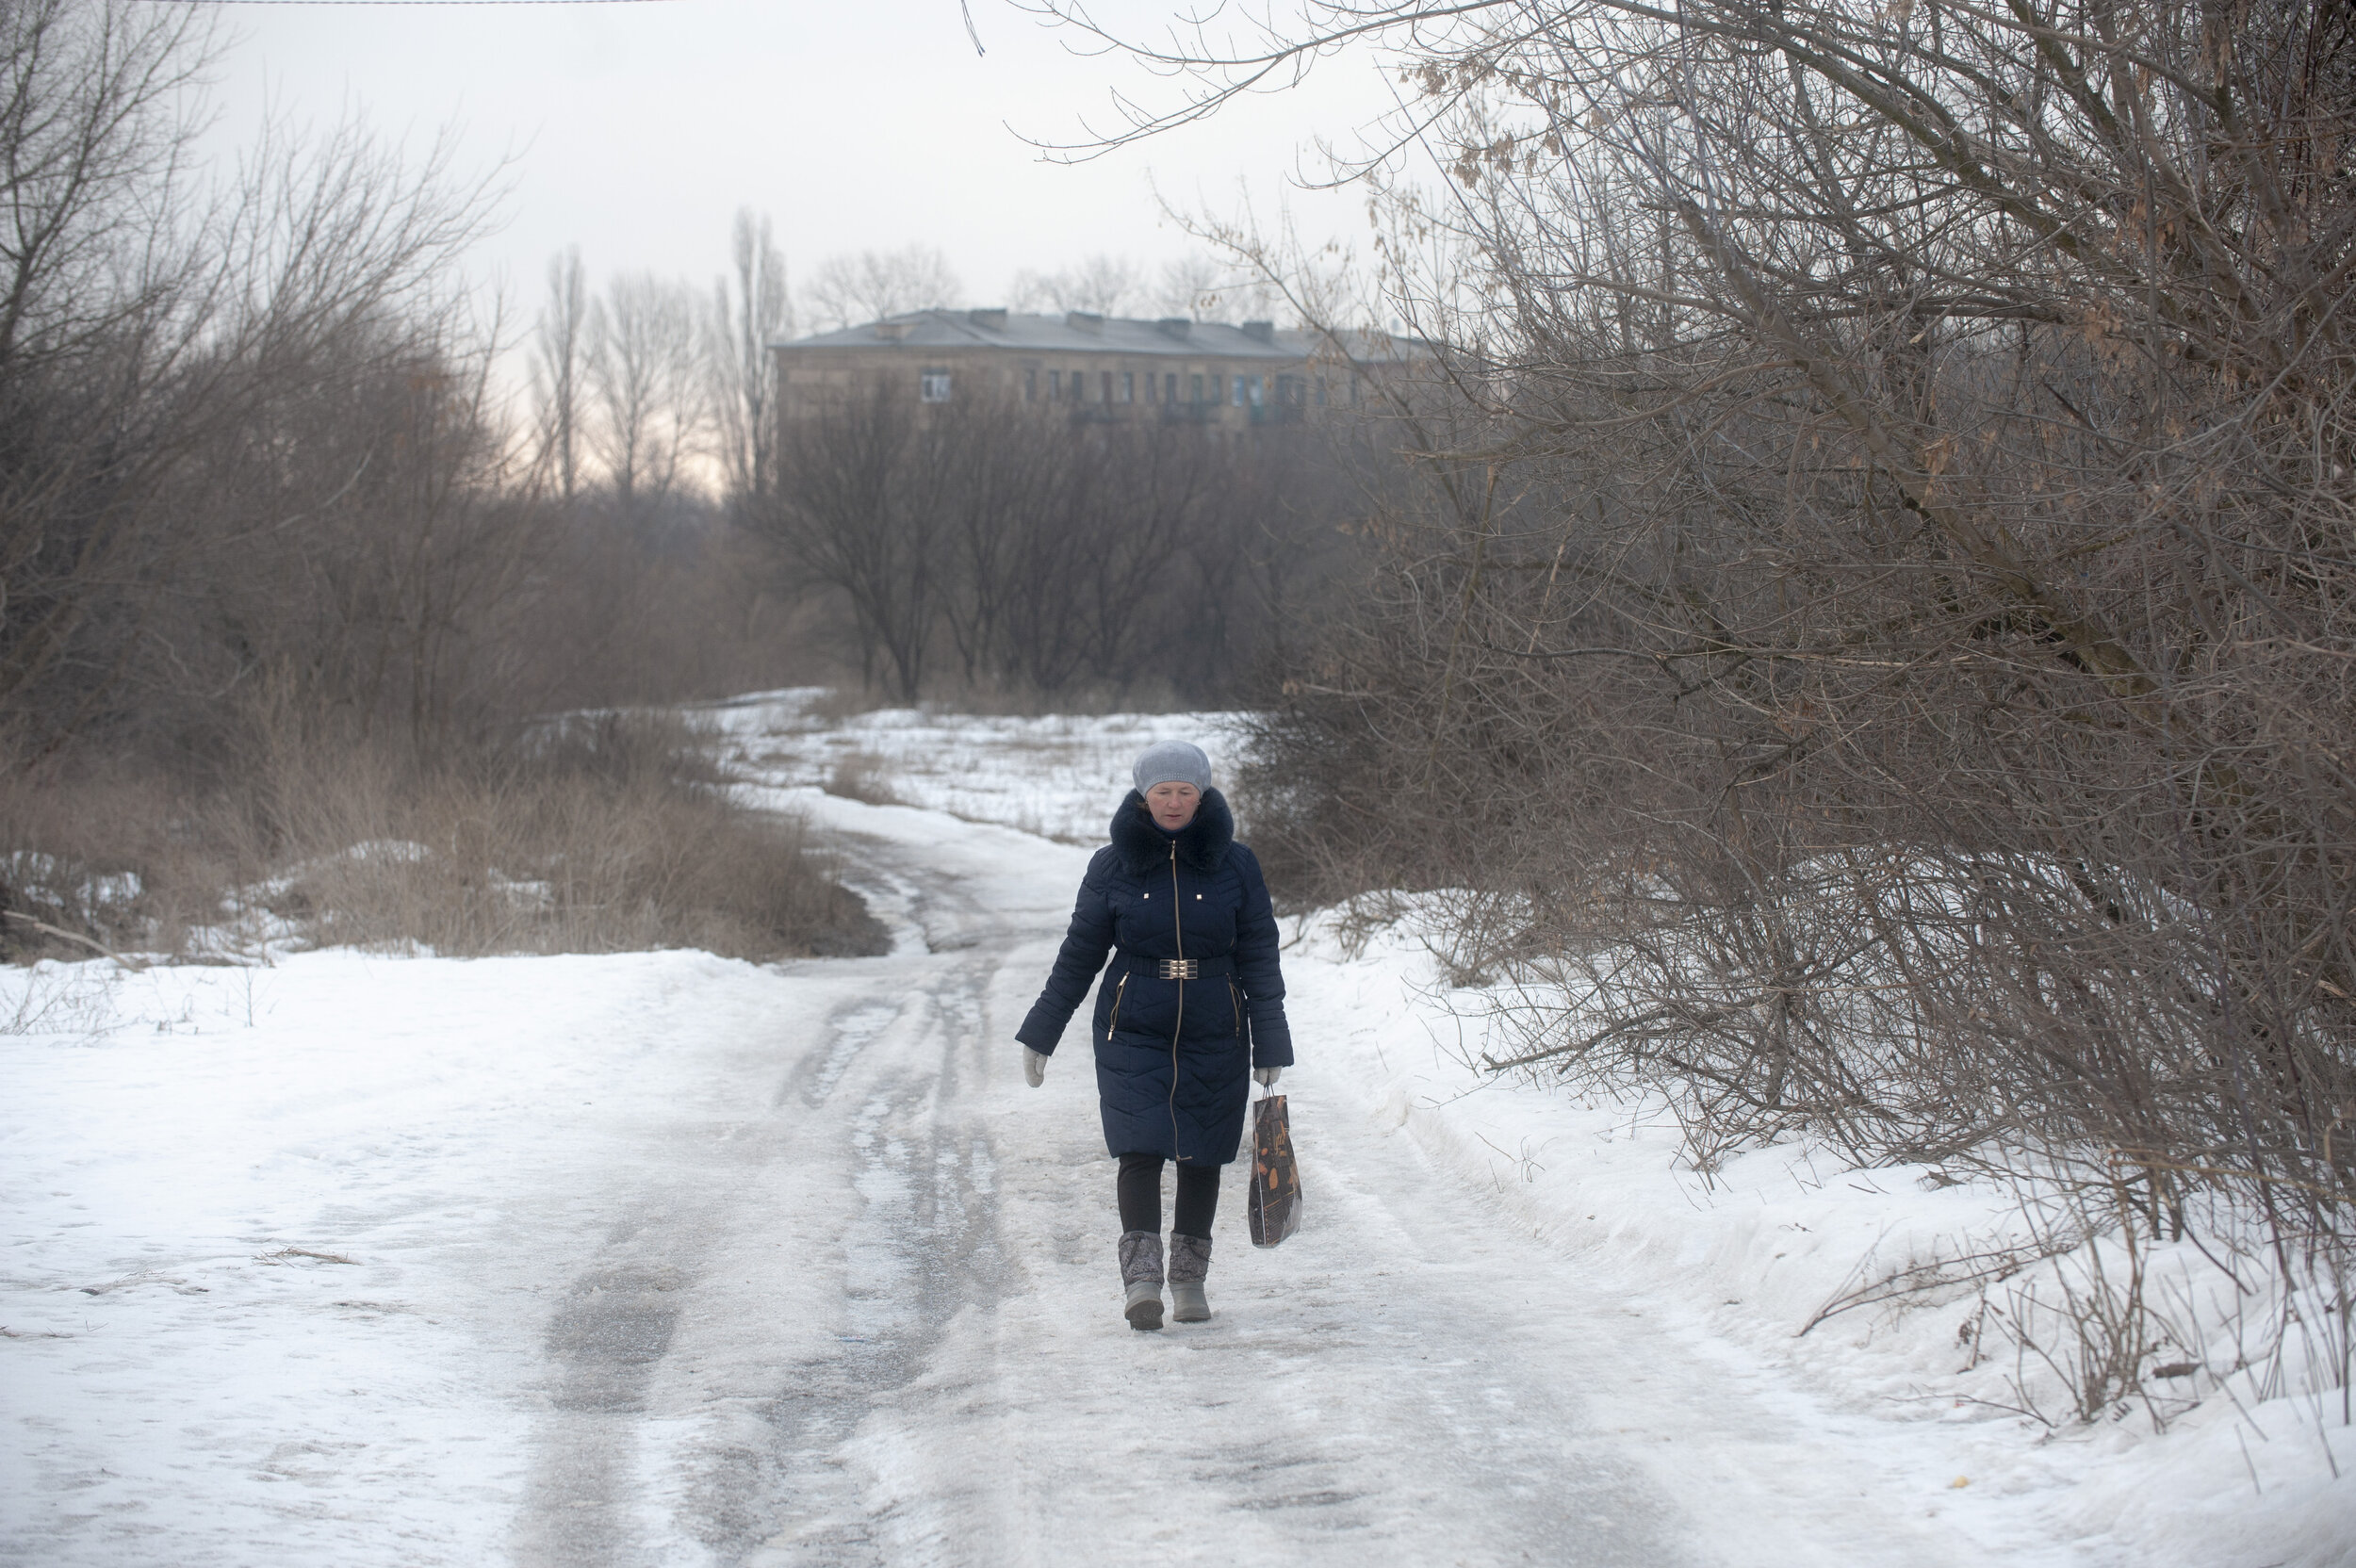  A teacher at the Zolote-4 elementary school braves the long lonely walk from ‘Point Zero’ to town every day to teach the few remaining students at her school. Despite the best efforts of teachers to continue providing education on the frontlines, la